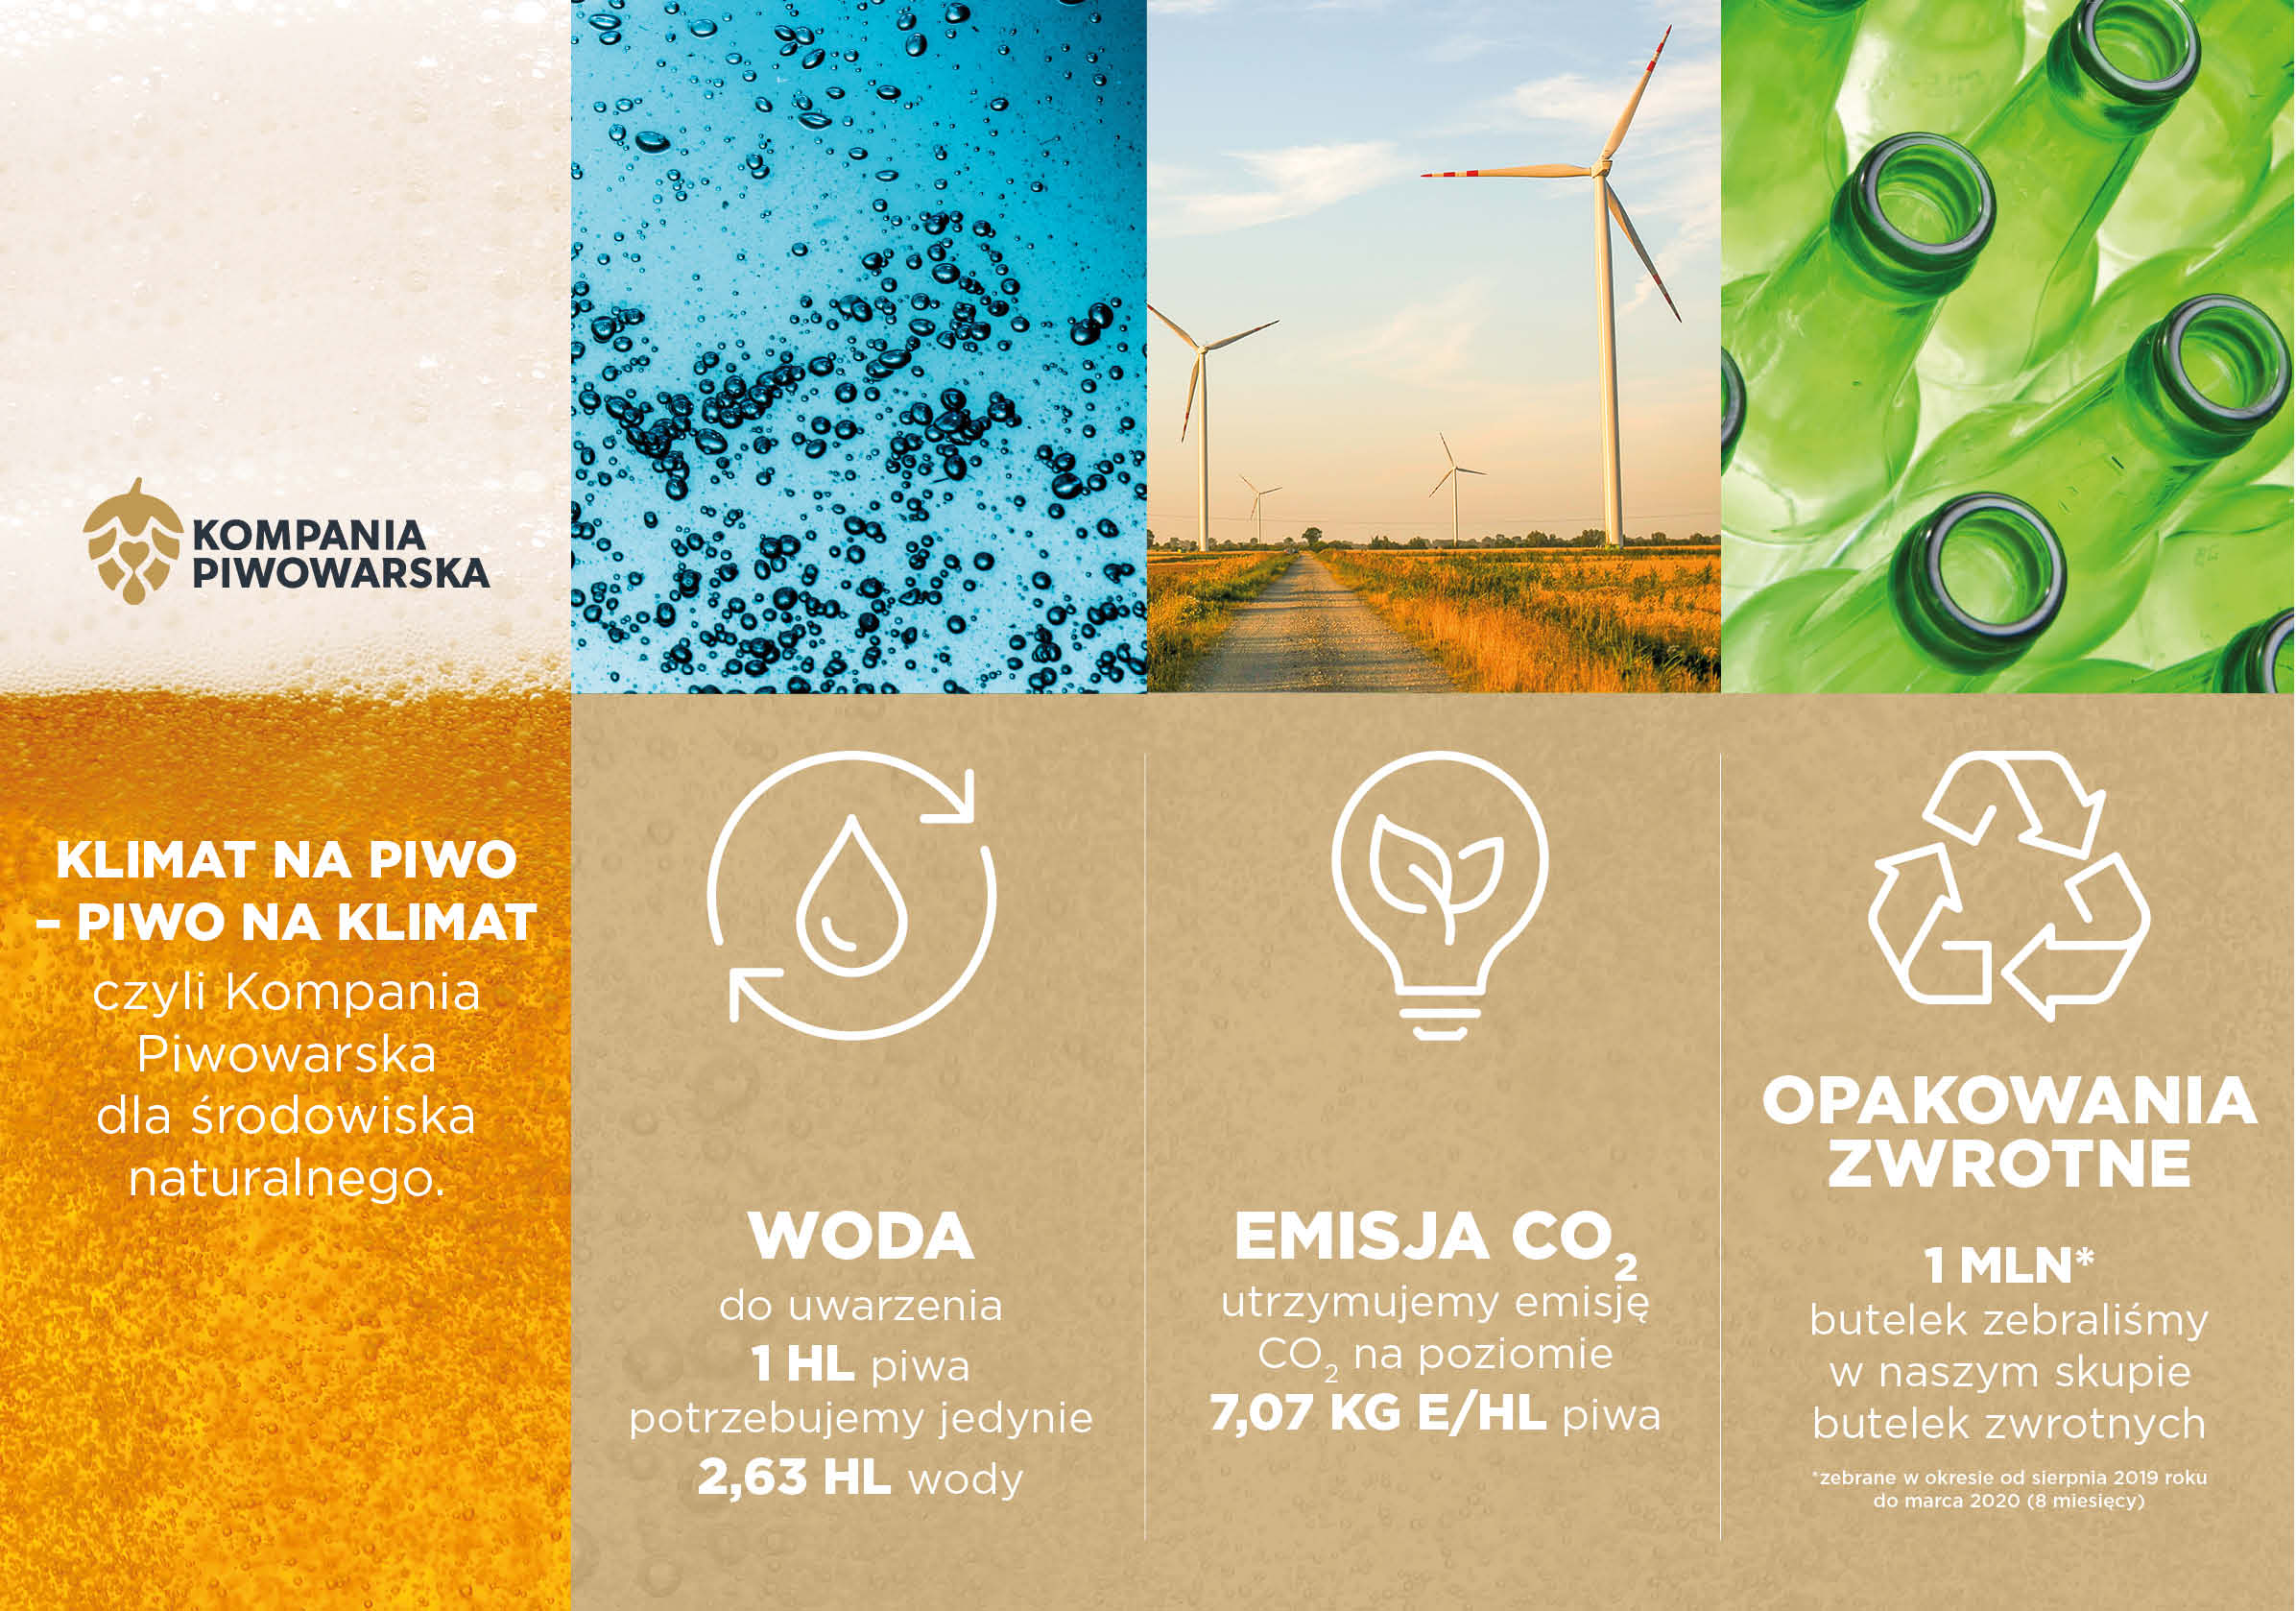 Climate for beer – beer for climate, meaning Kompania Piwowarska for the environment.